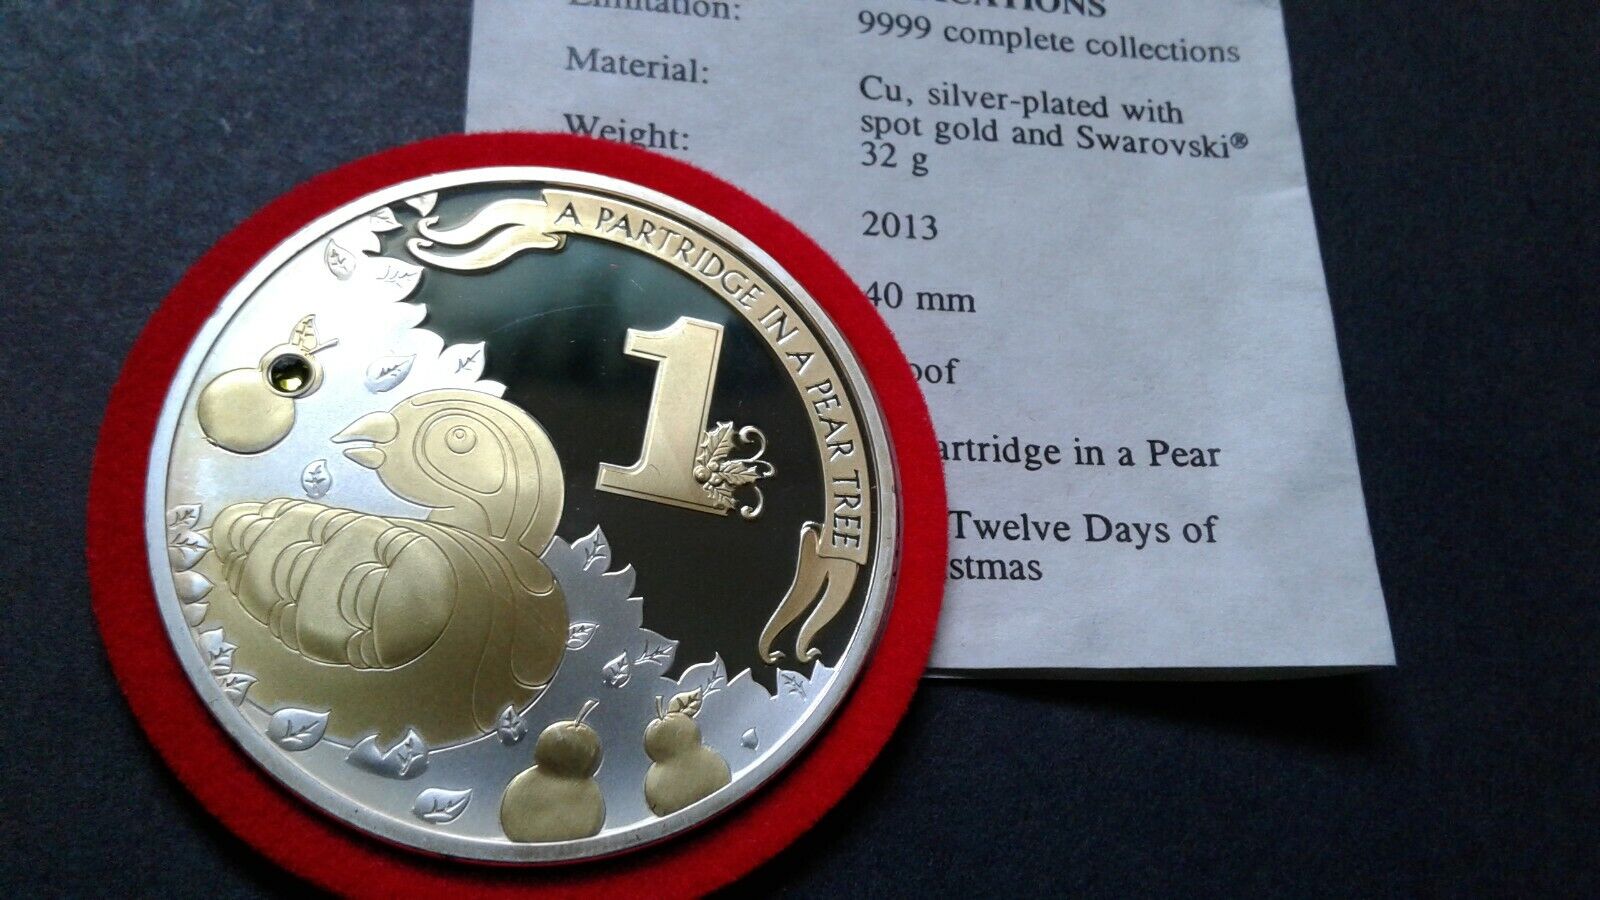  US 2013 AMERICAN MINT A Partridge in a Pear CU, Silver plated with spot Gold